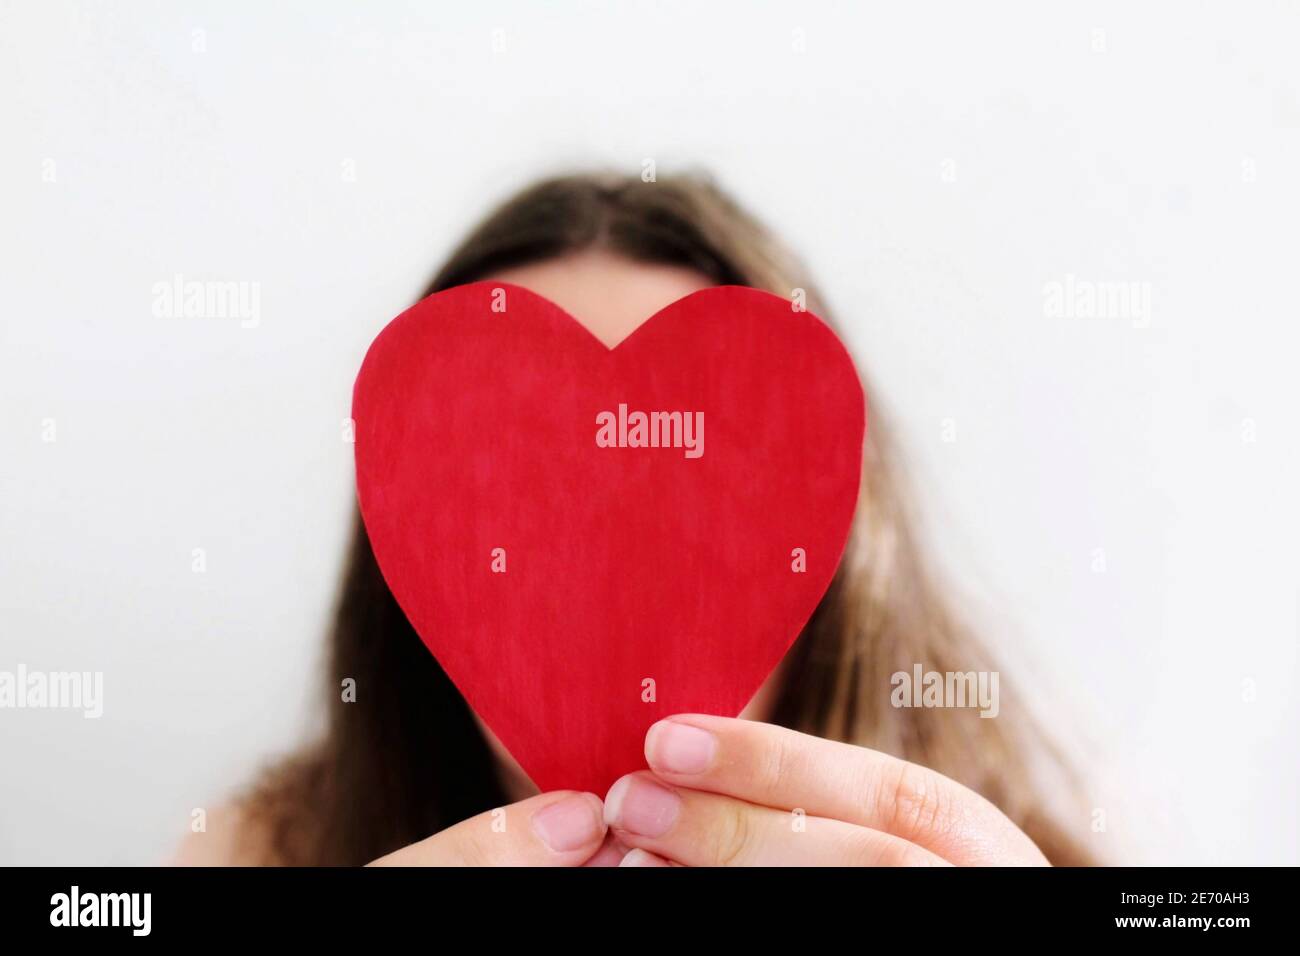 A white woman with brown hair holding a red heart in front of her face, hiding her face. Love, valentine's day and blind date concept. Stock Photo